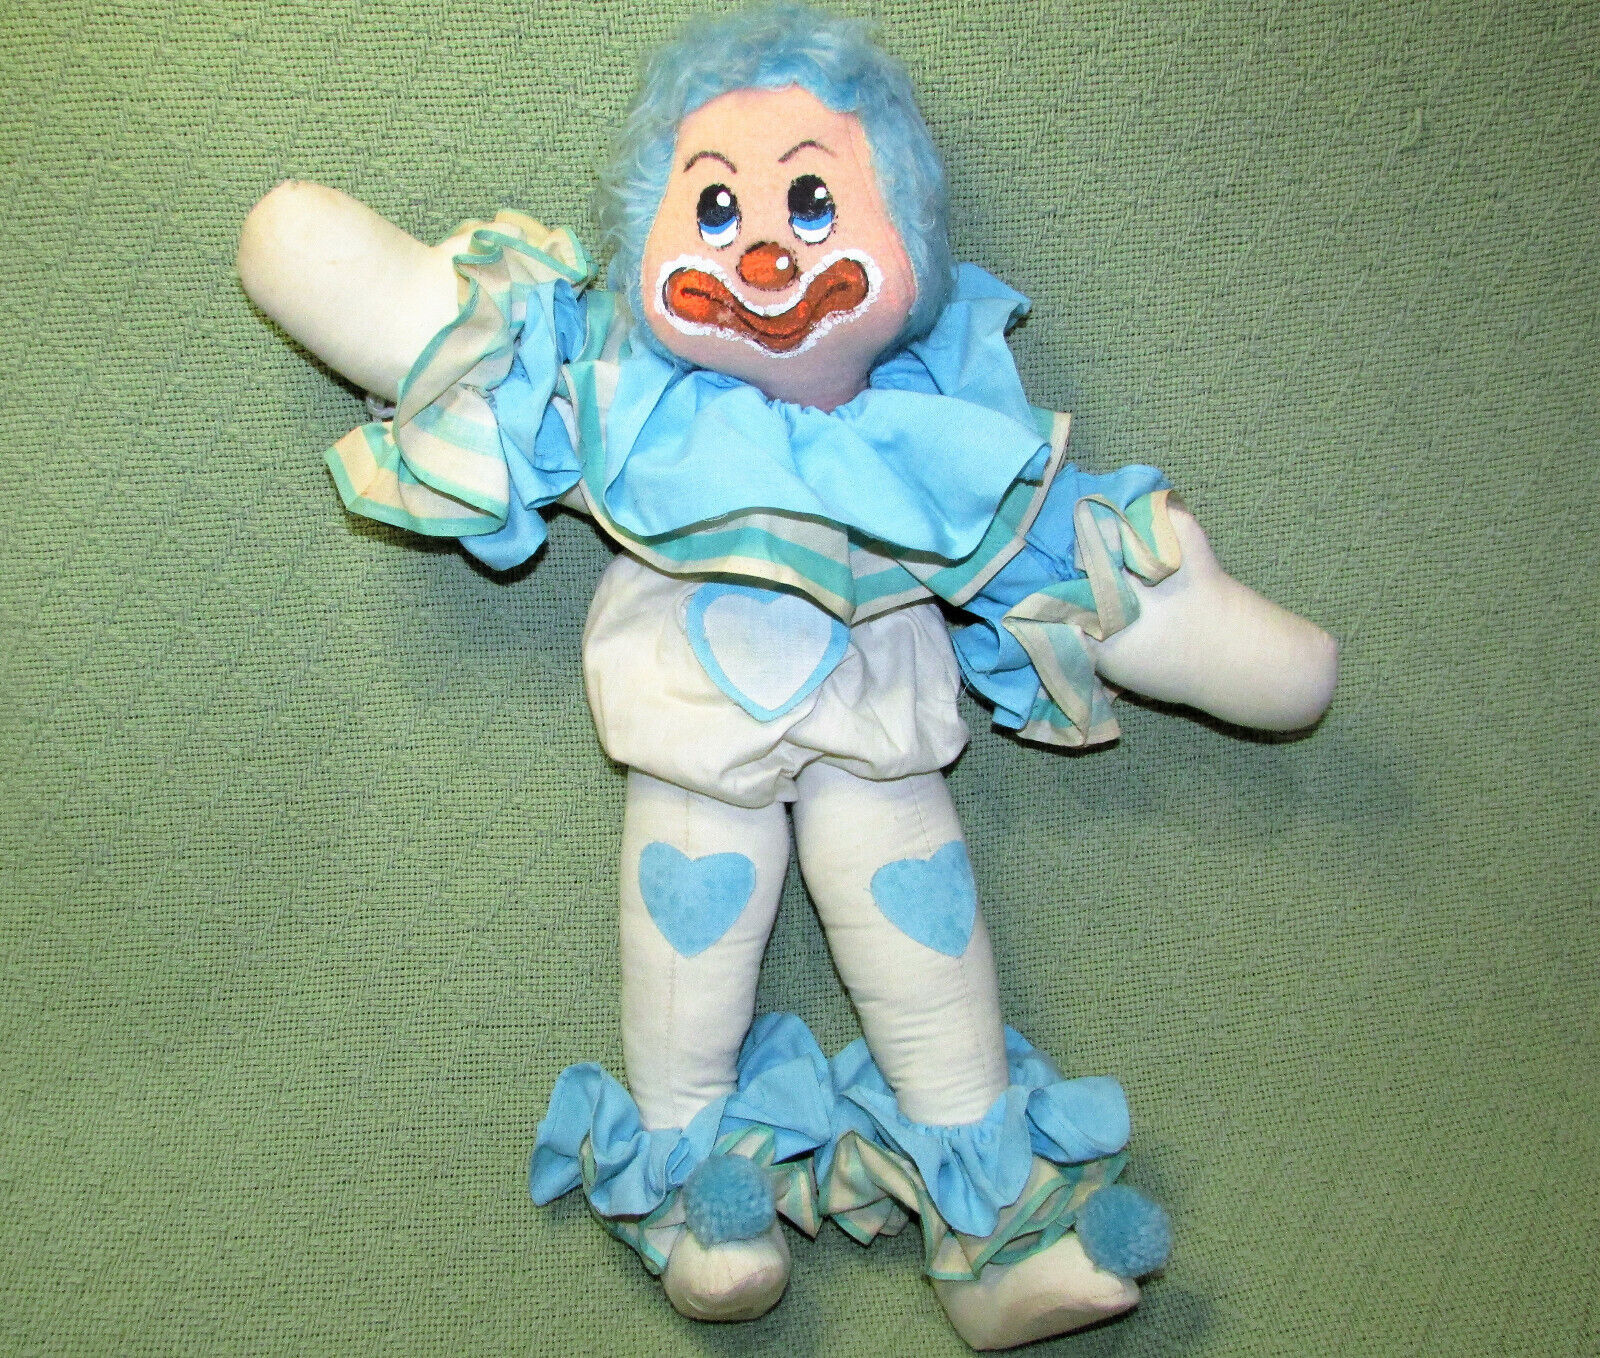 Primary image for 1978 ANNETTE LITTLE CLOWN DOLL BLUE STUFFED 19" VINTAGE ENESCO DECORATIVE DOLL